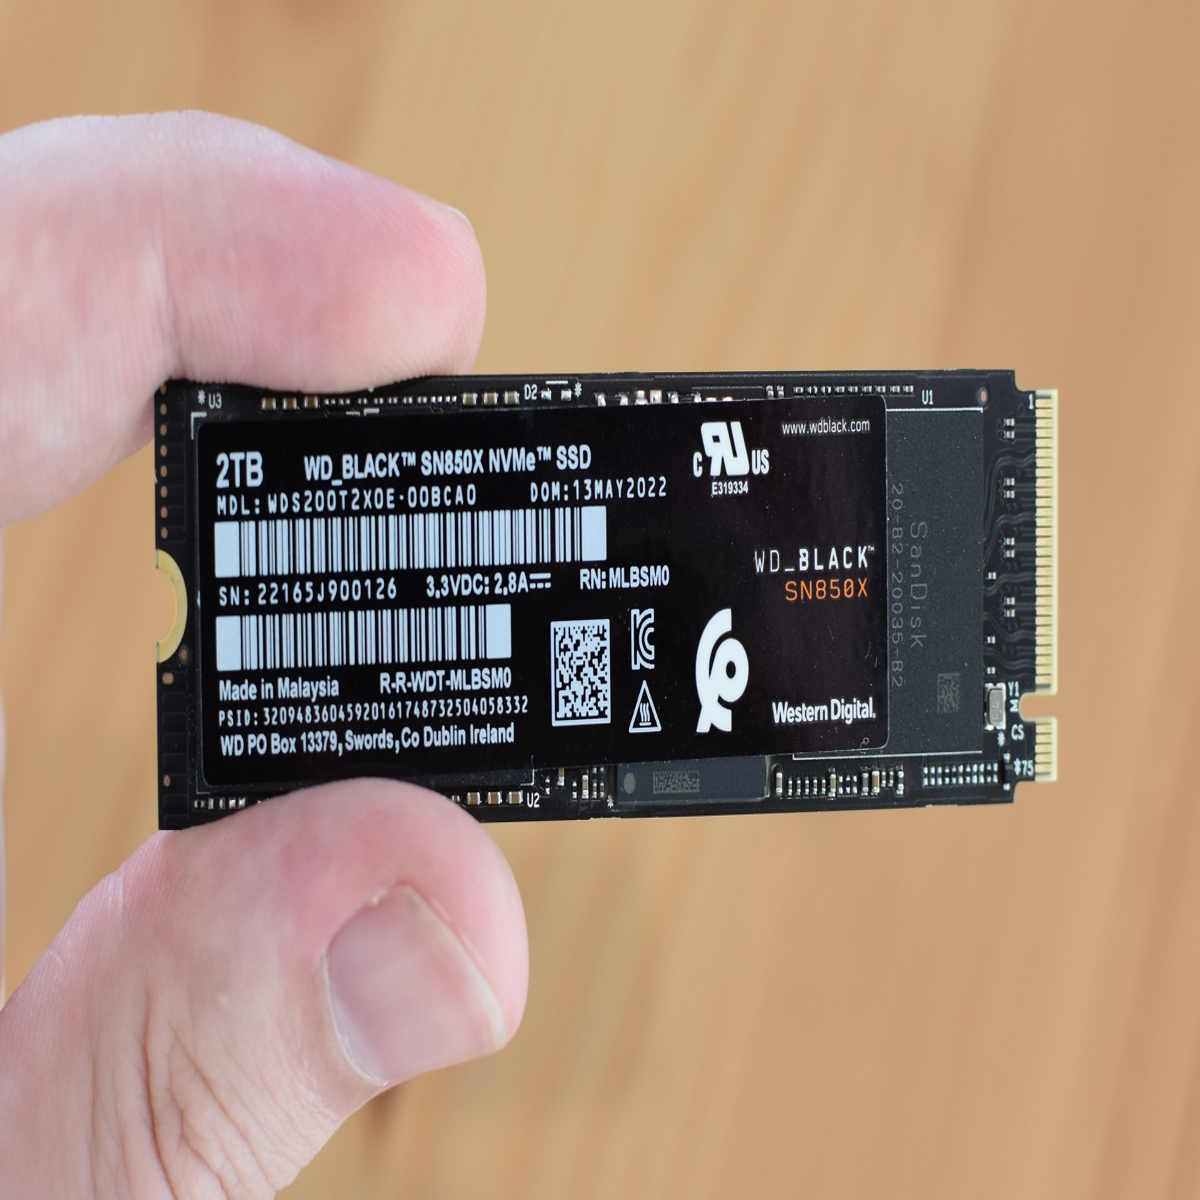 WD's SN850x SSD is our top pick for gaming - and it's down to £128 